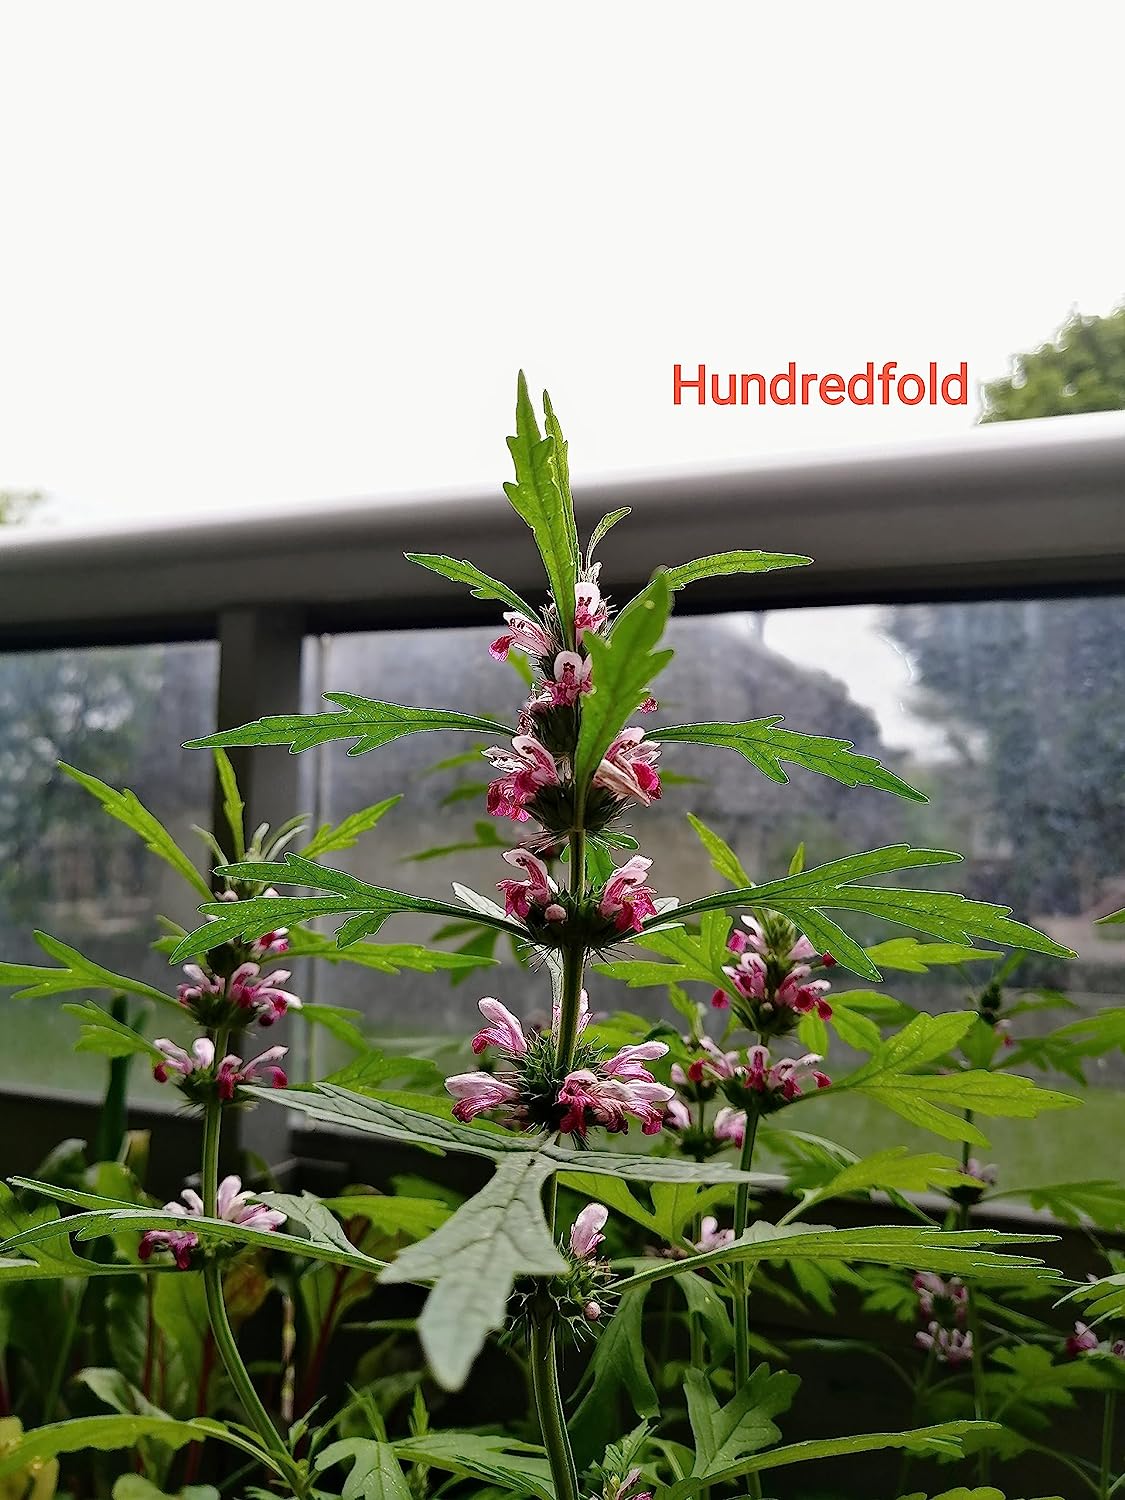 Hundredfold Siberian Motherwort 500 Herb Seeds - Leonurus Sibiricus Non-GMO Yi Mu Cao Medicinal and Ornamental Flowering Herb, Packed and Shipped in Canada